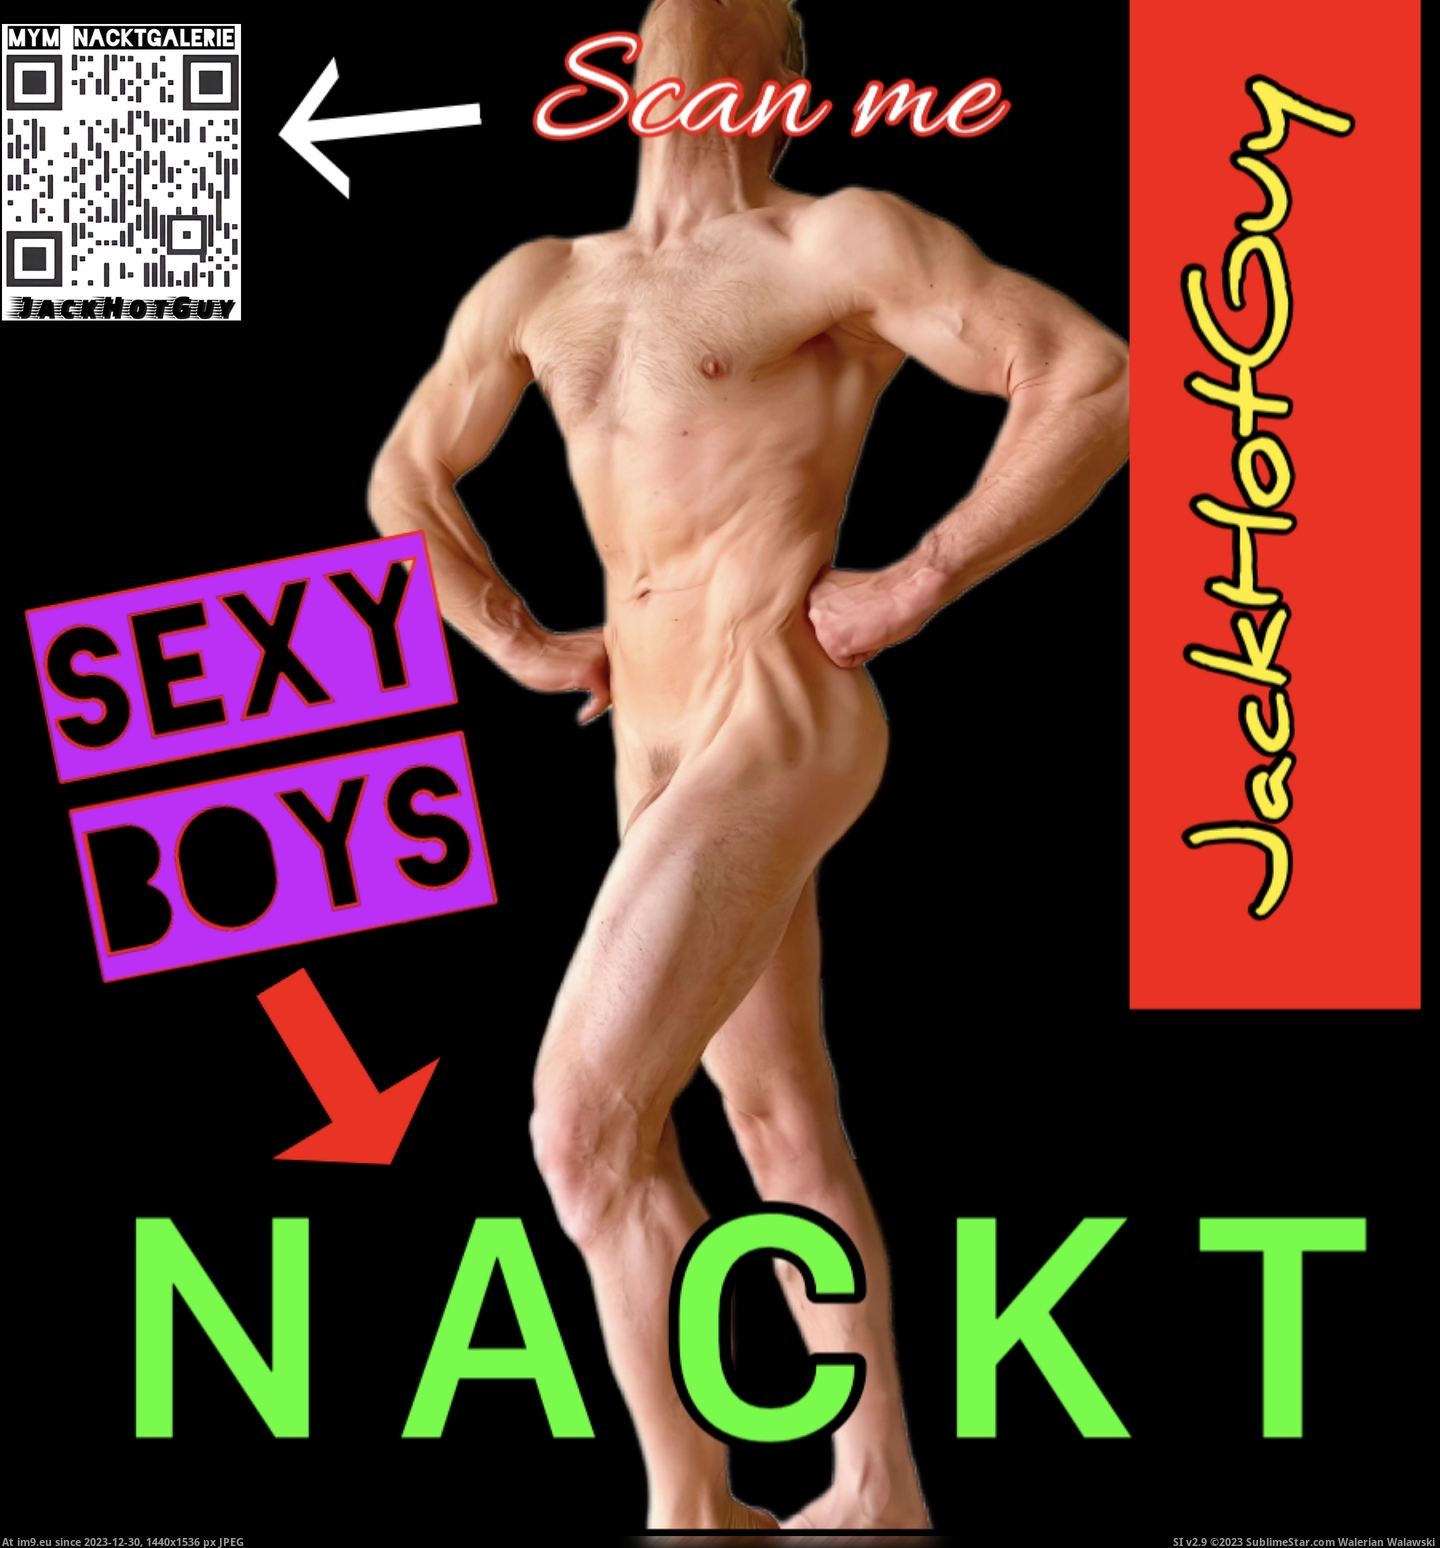 #Guys #Save #Incollage #Penis incollage_save Pic. (Image of album JackHotGuy))